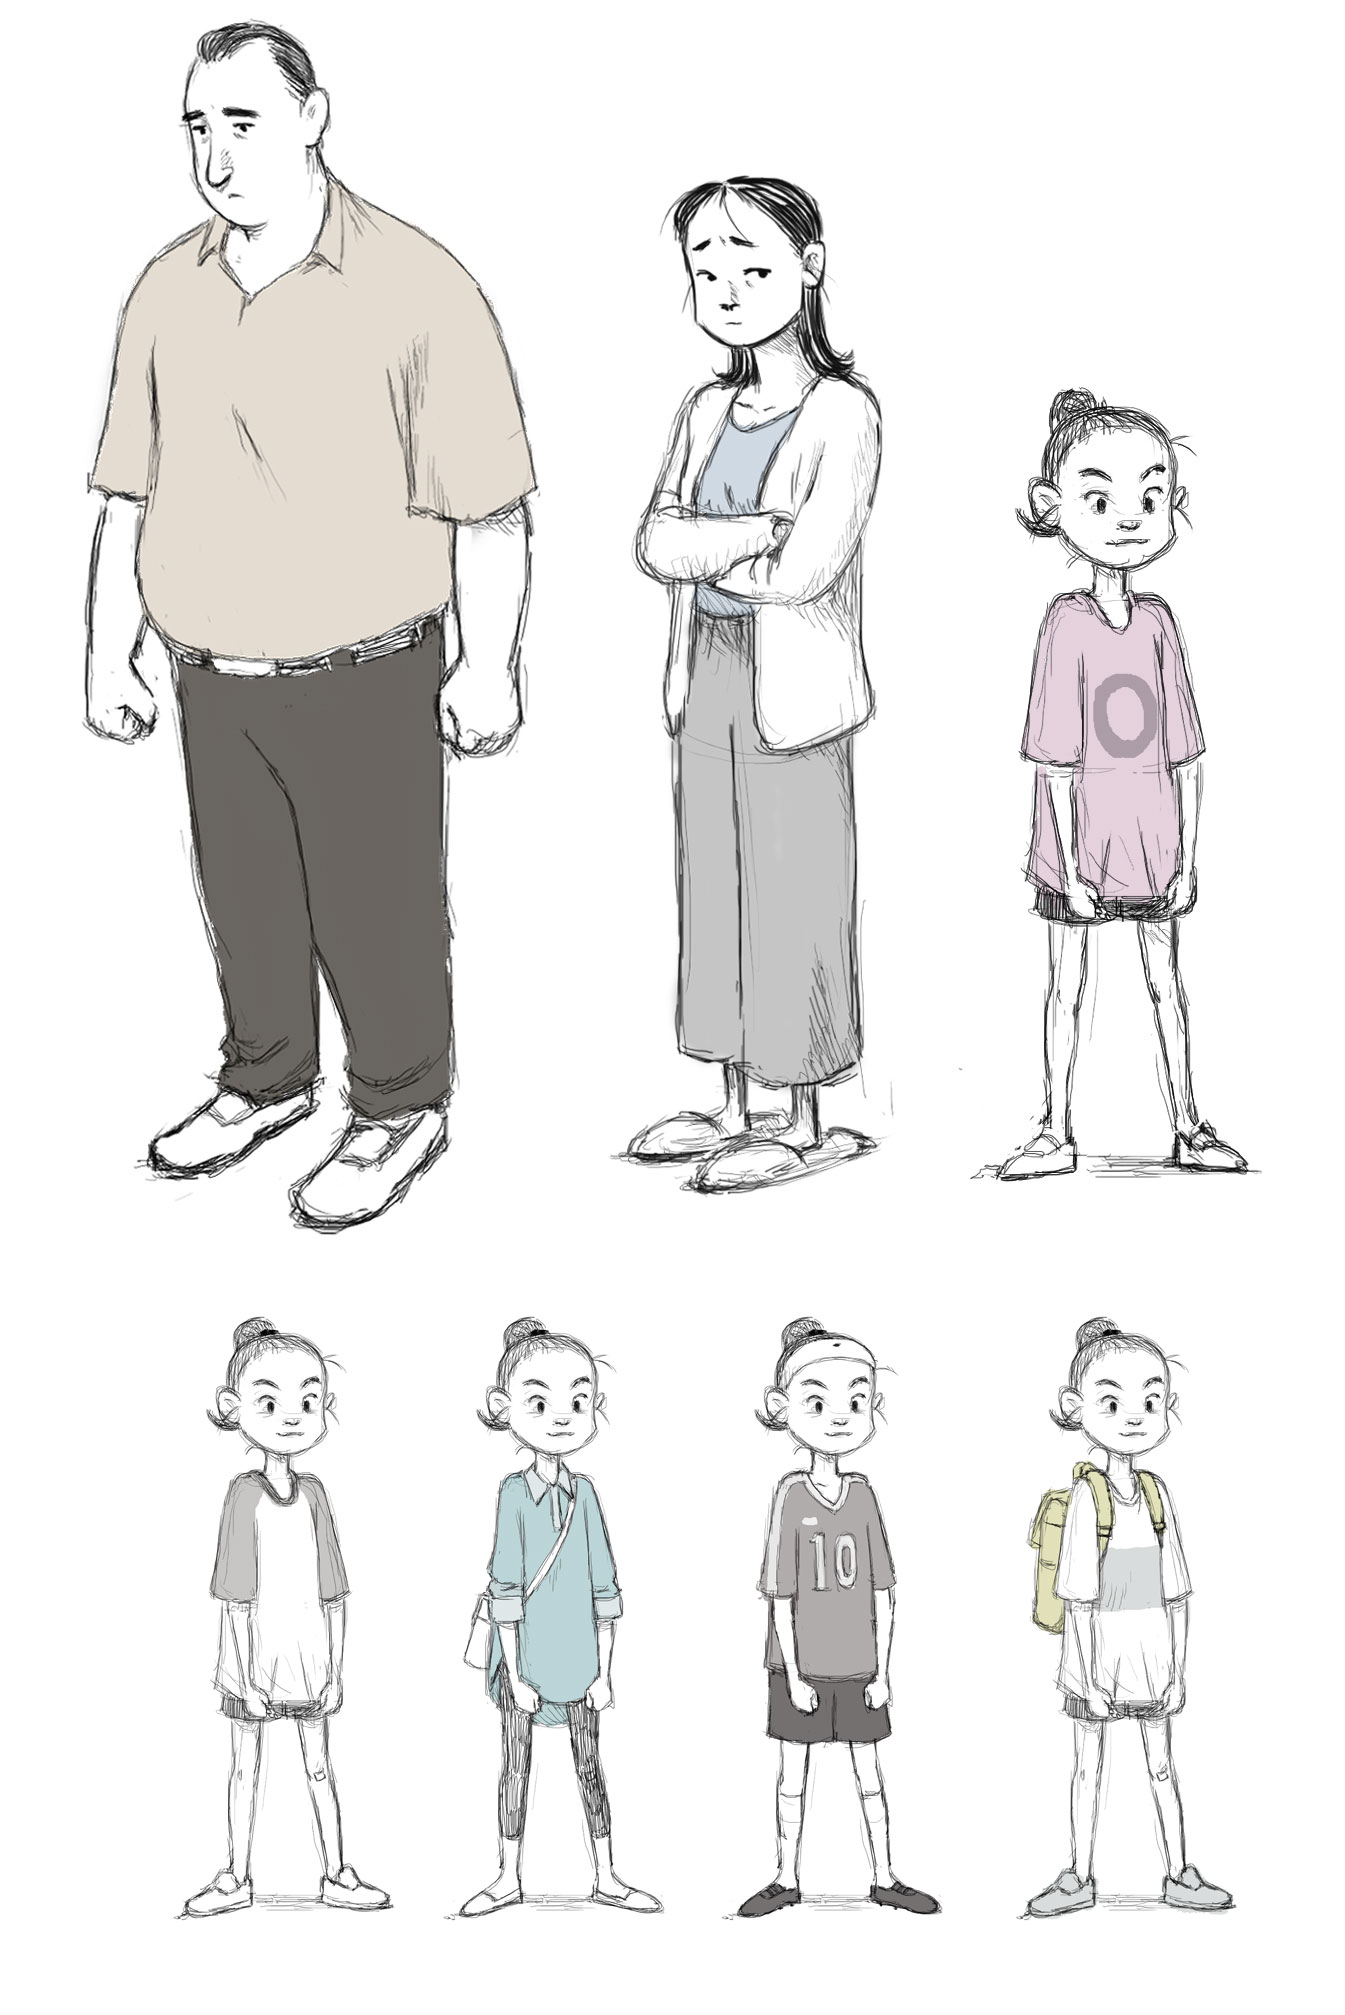 Character and outfit designs from "If Anything Happens I Love You."